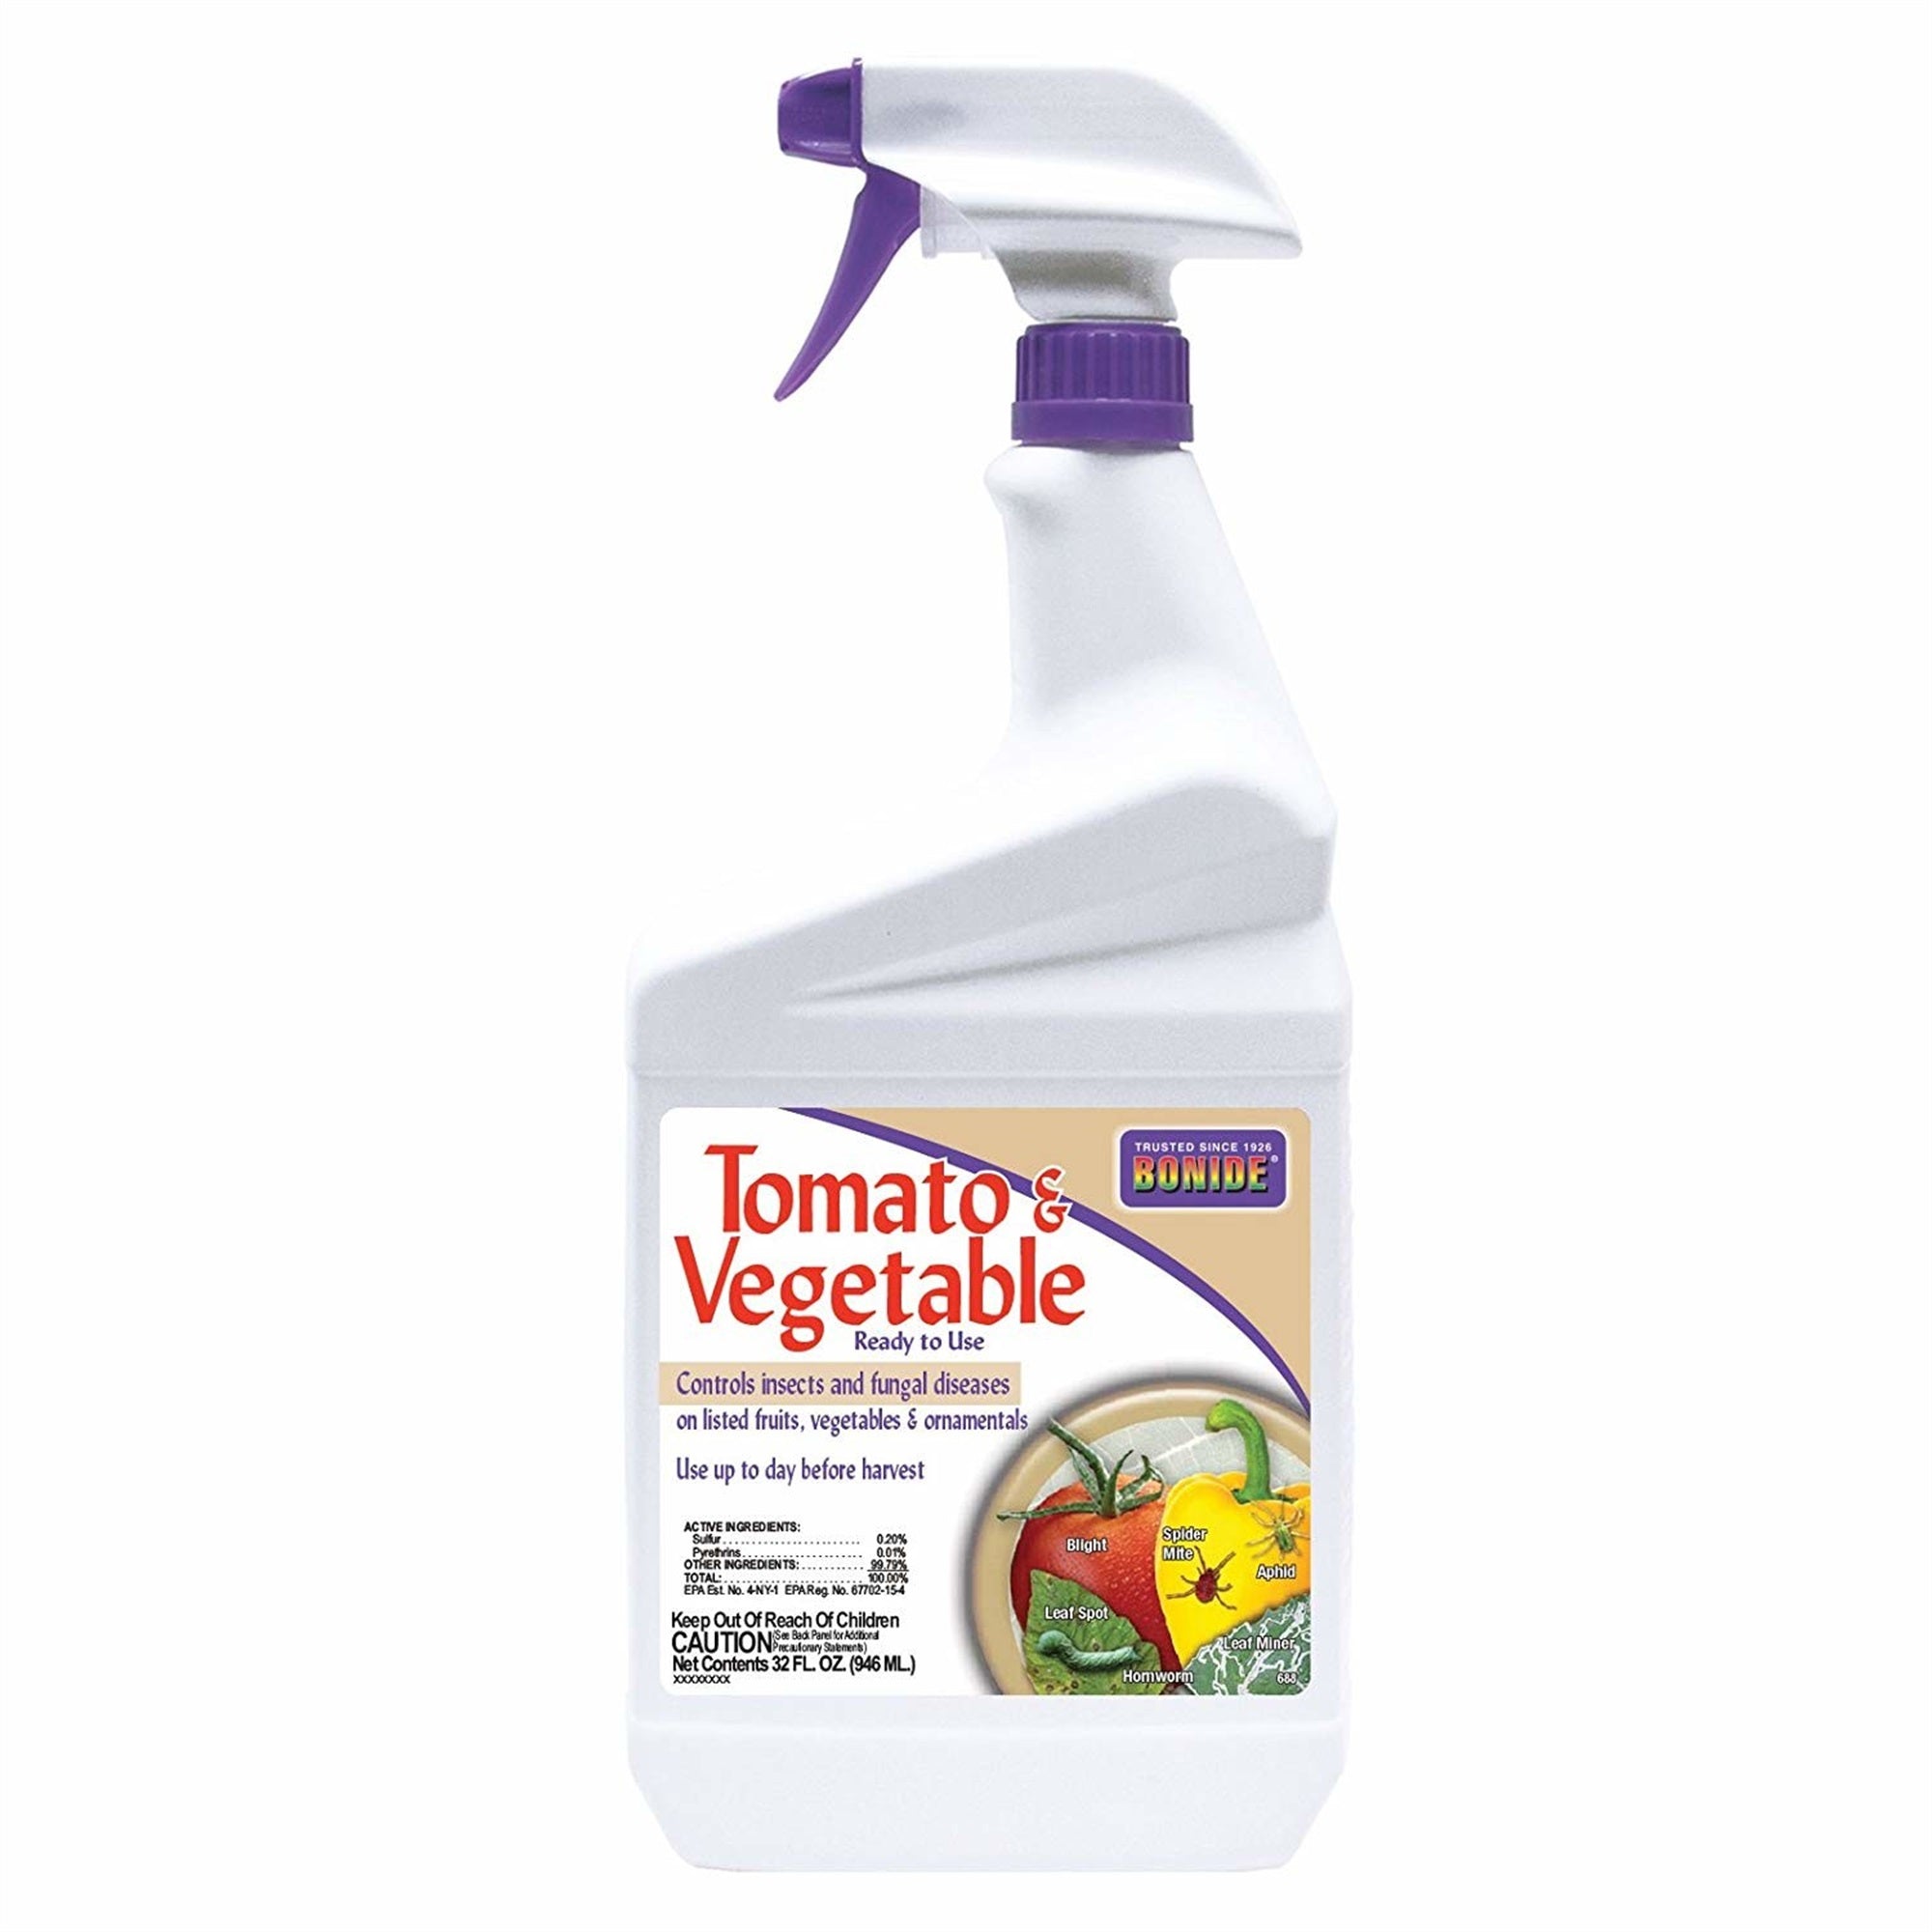 Bonide Tomato And Vegetable Pesticide 3-In-1 Ready To Use, 32 Ounces